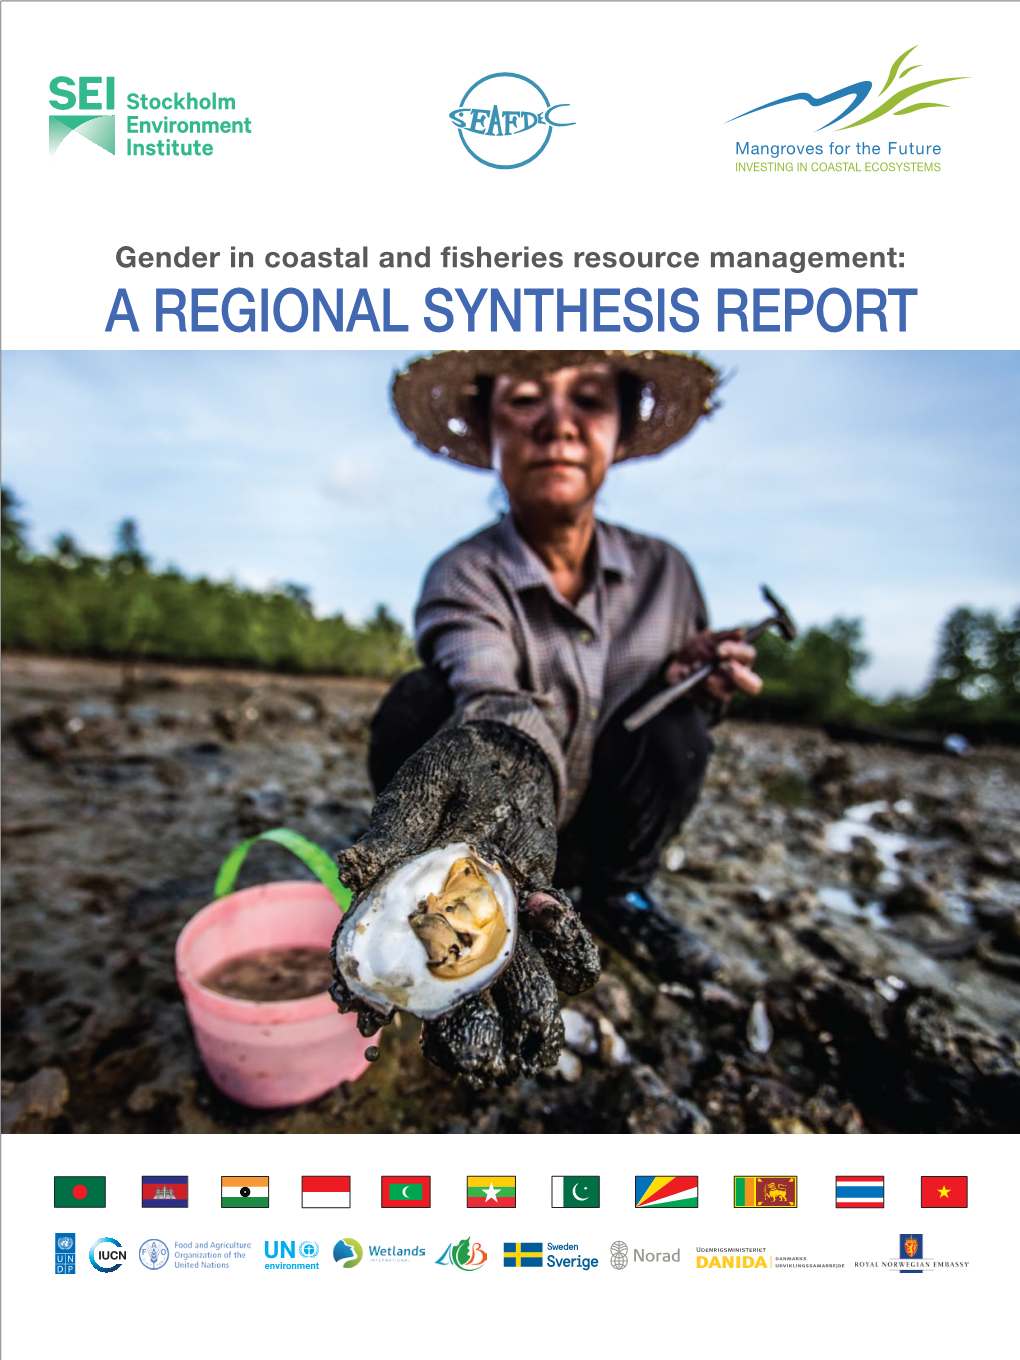 Gender in Coastal and Fisheries Resource Management in South and Southeast Asia (Parts 3 and 6)